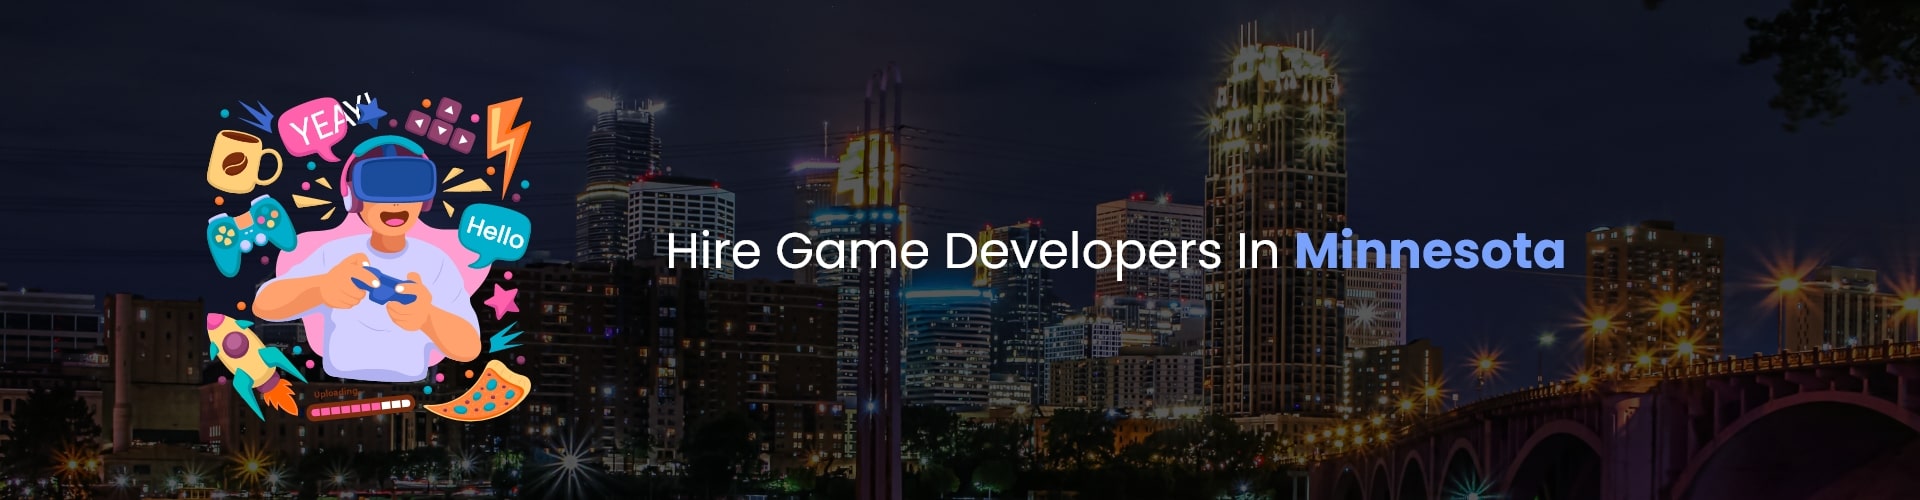 hire game developers in minnesota